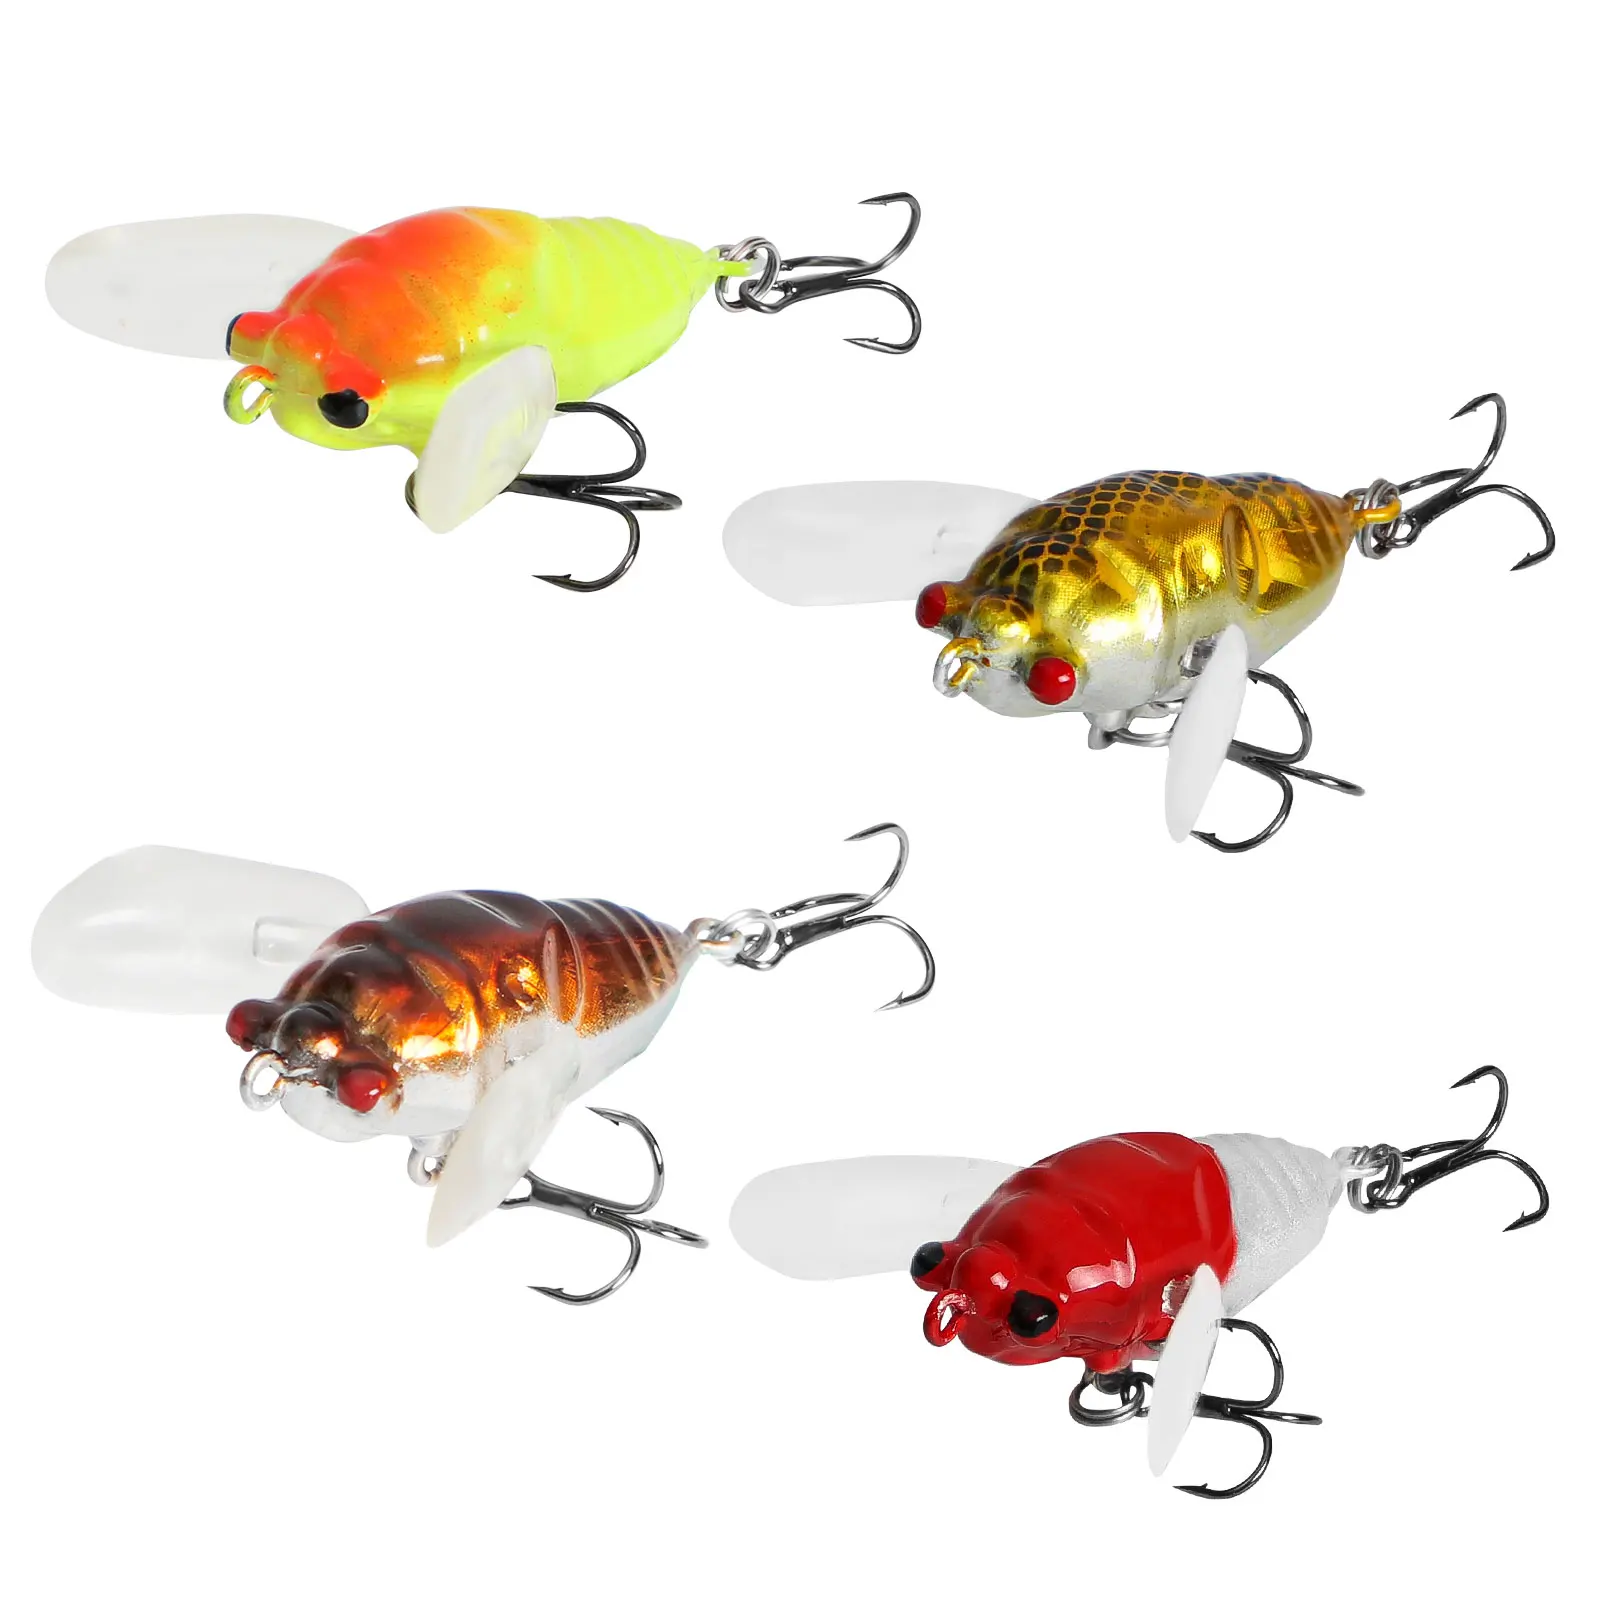 

FreeFisher 12pcs/Set Locust Insects Fishing Lures 5cm/7g Fly Fishing Flies Hard Artificial Bait with Treble Hooks 3D Fish Eyes